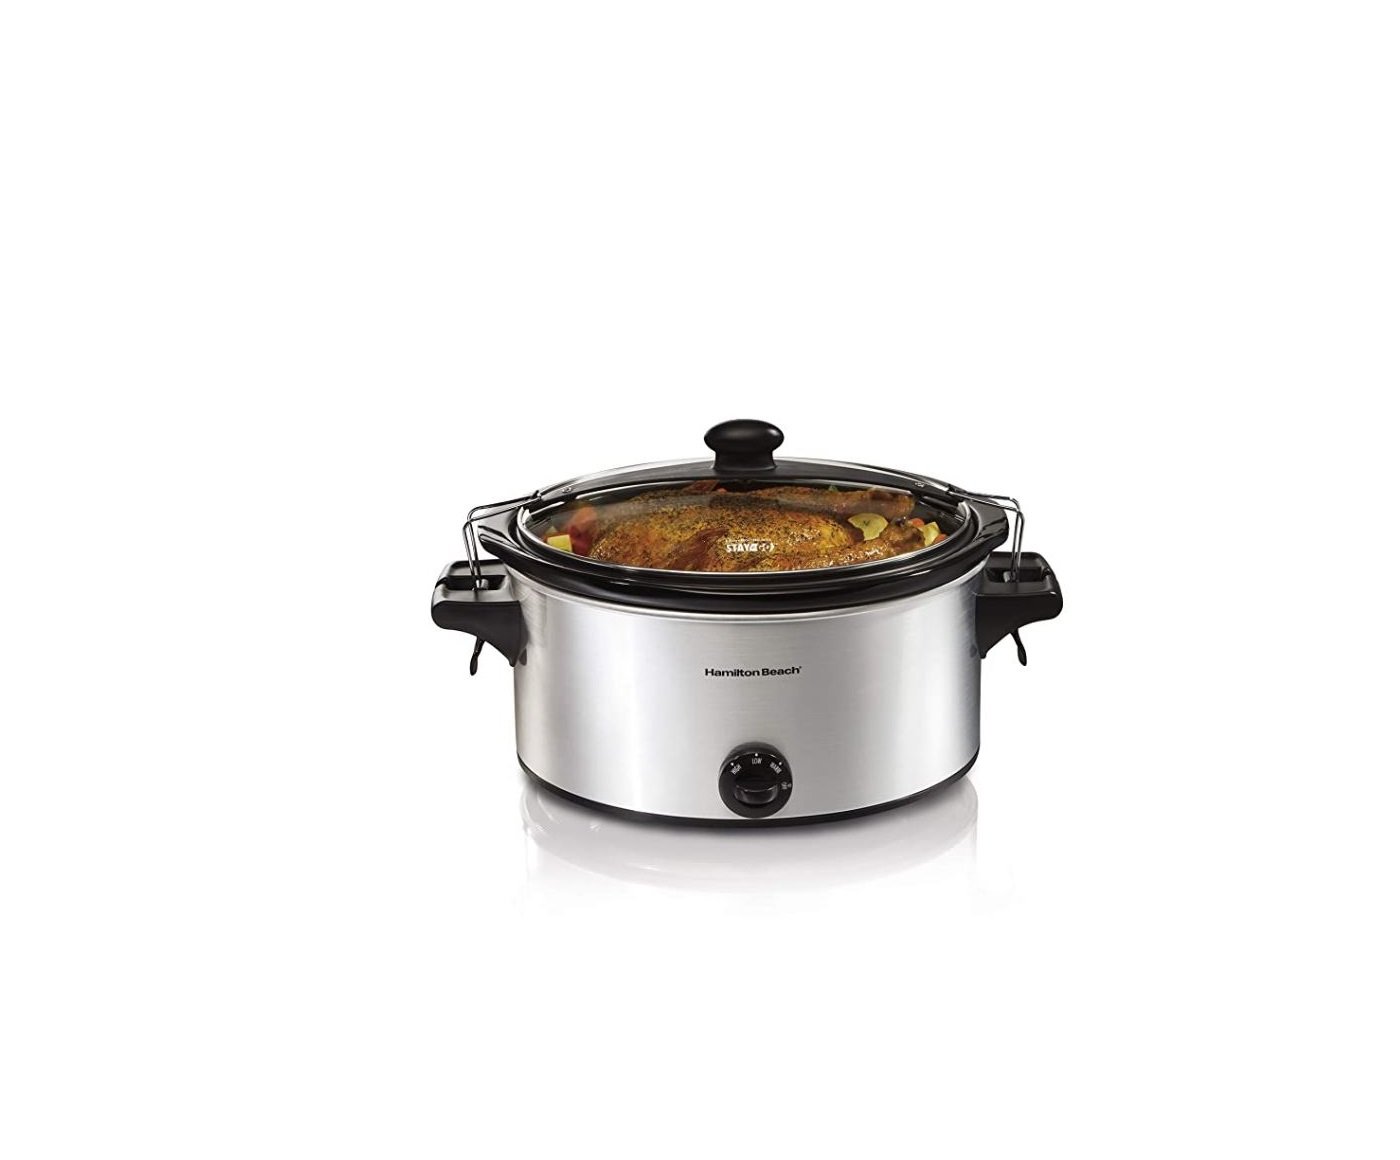 Hamilton 6-Quart Beach Stay or Go Portable Slow Cooker with Lid Lock User Manual